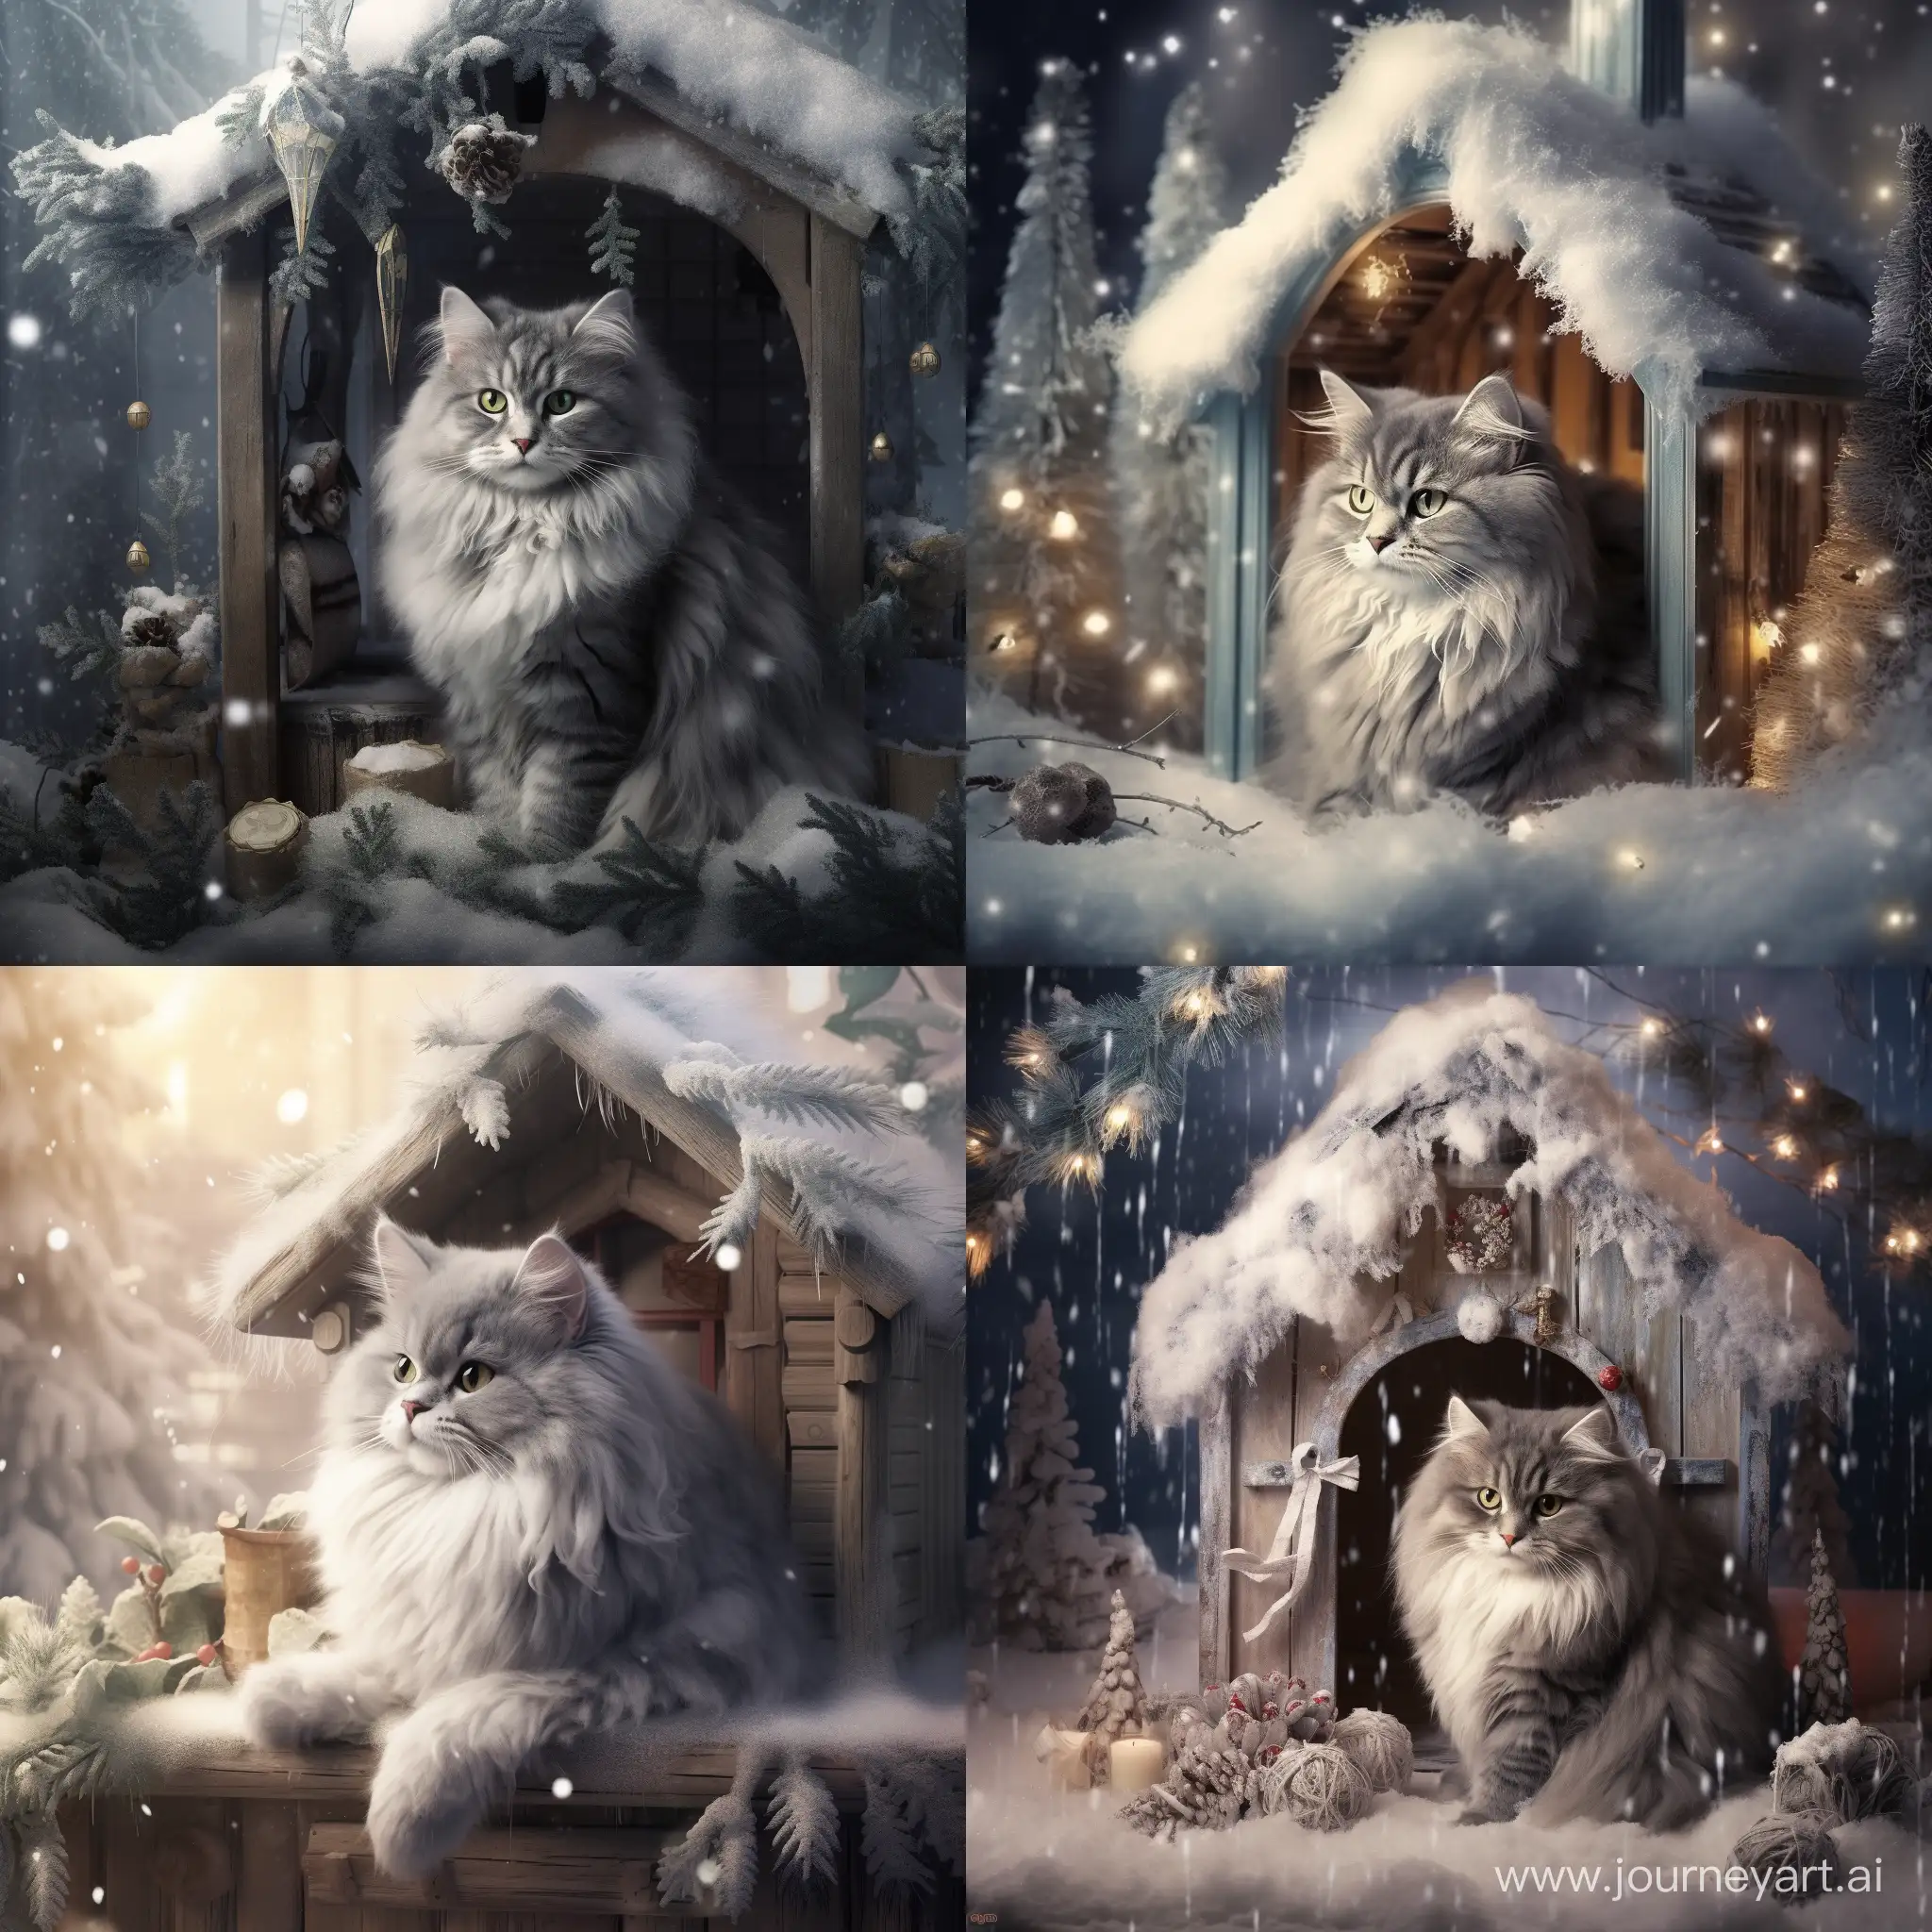 Enchanting-Christmas-Tale-Giant-Fluffy-Cat-Hugs-Wooden-House-in-Snowy-Forest